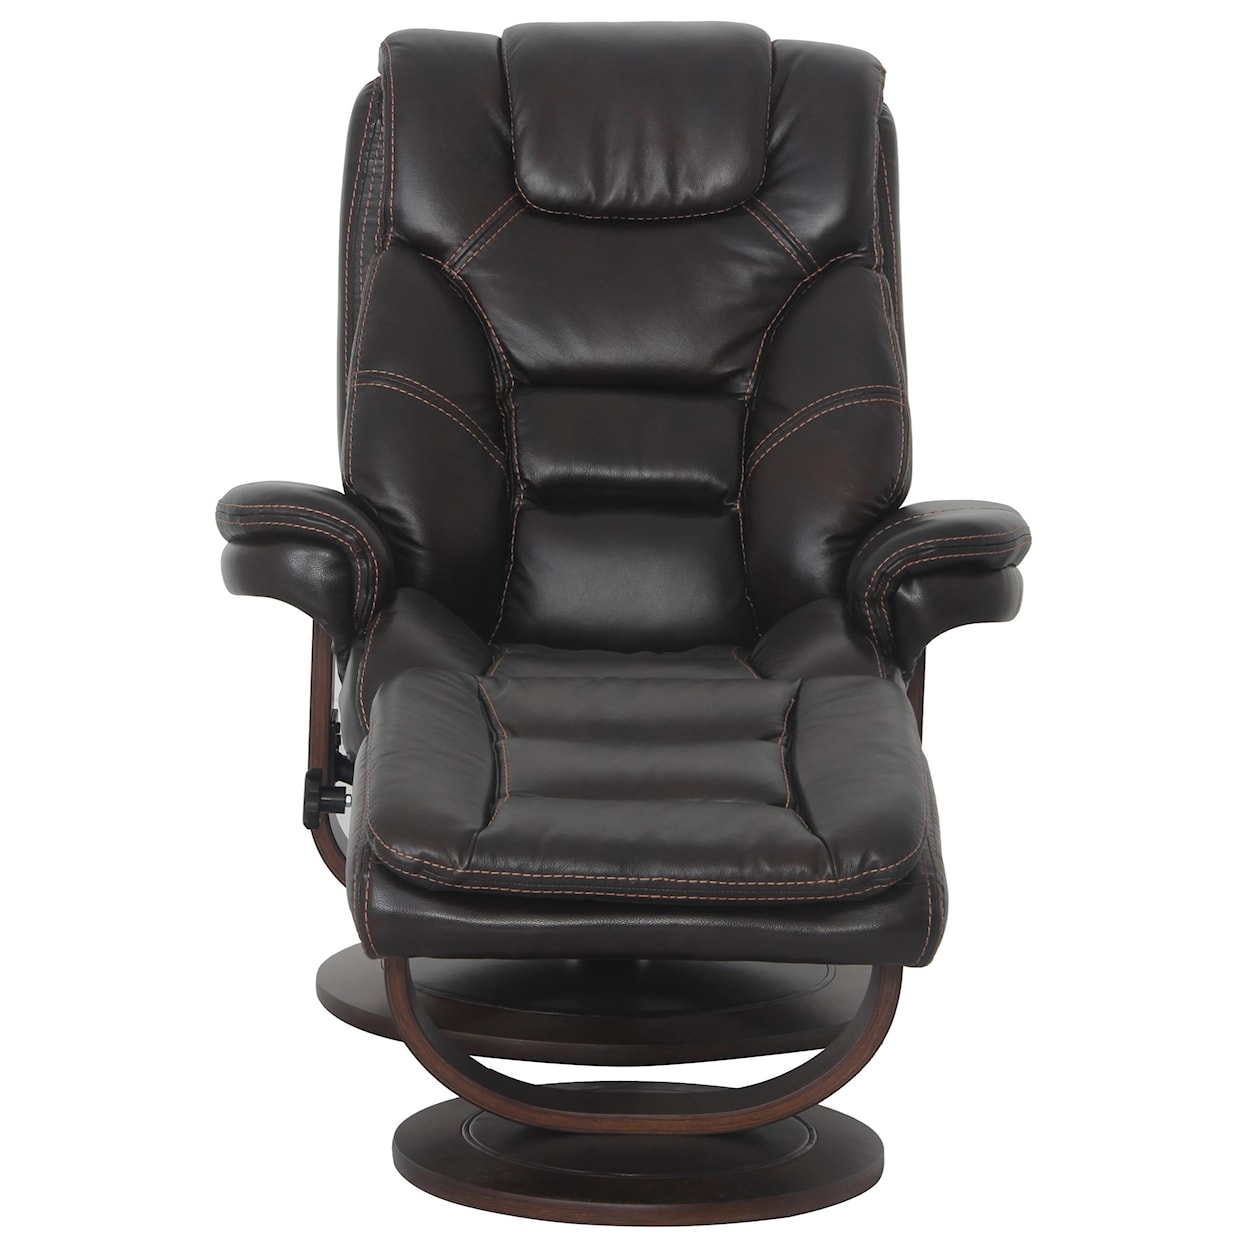 Cheers Issac - Black Issac Chair and Ottoman